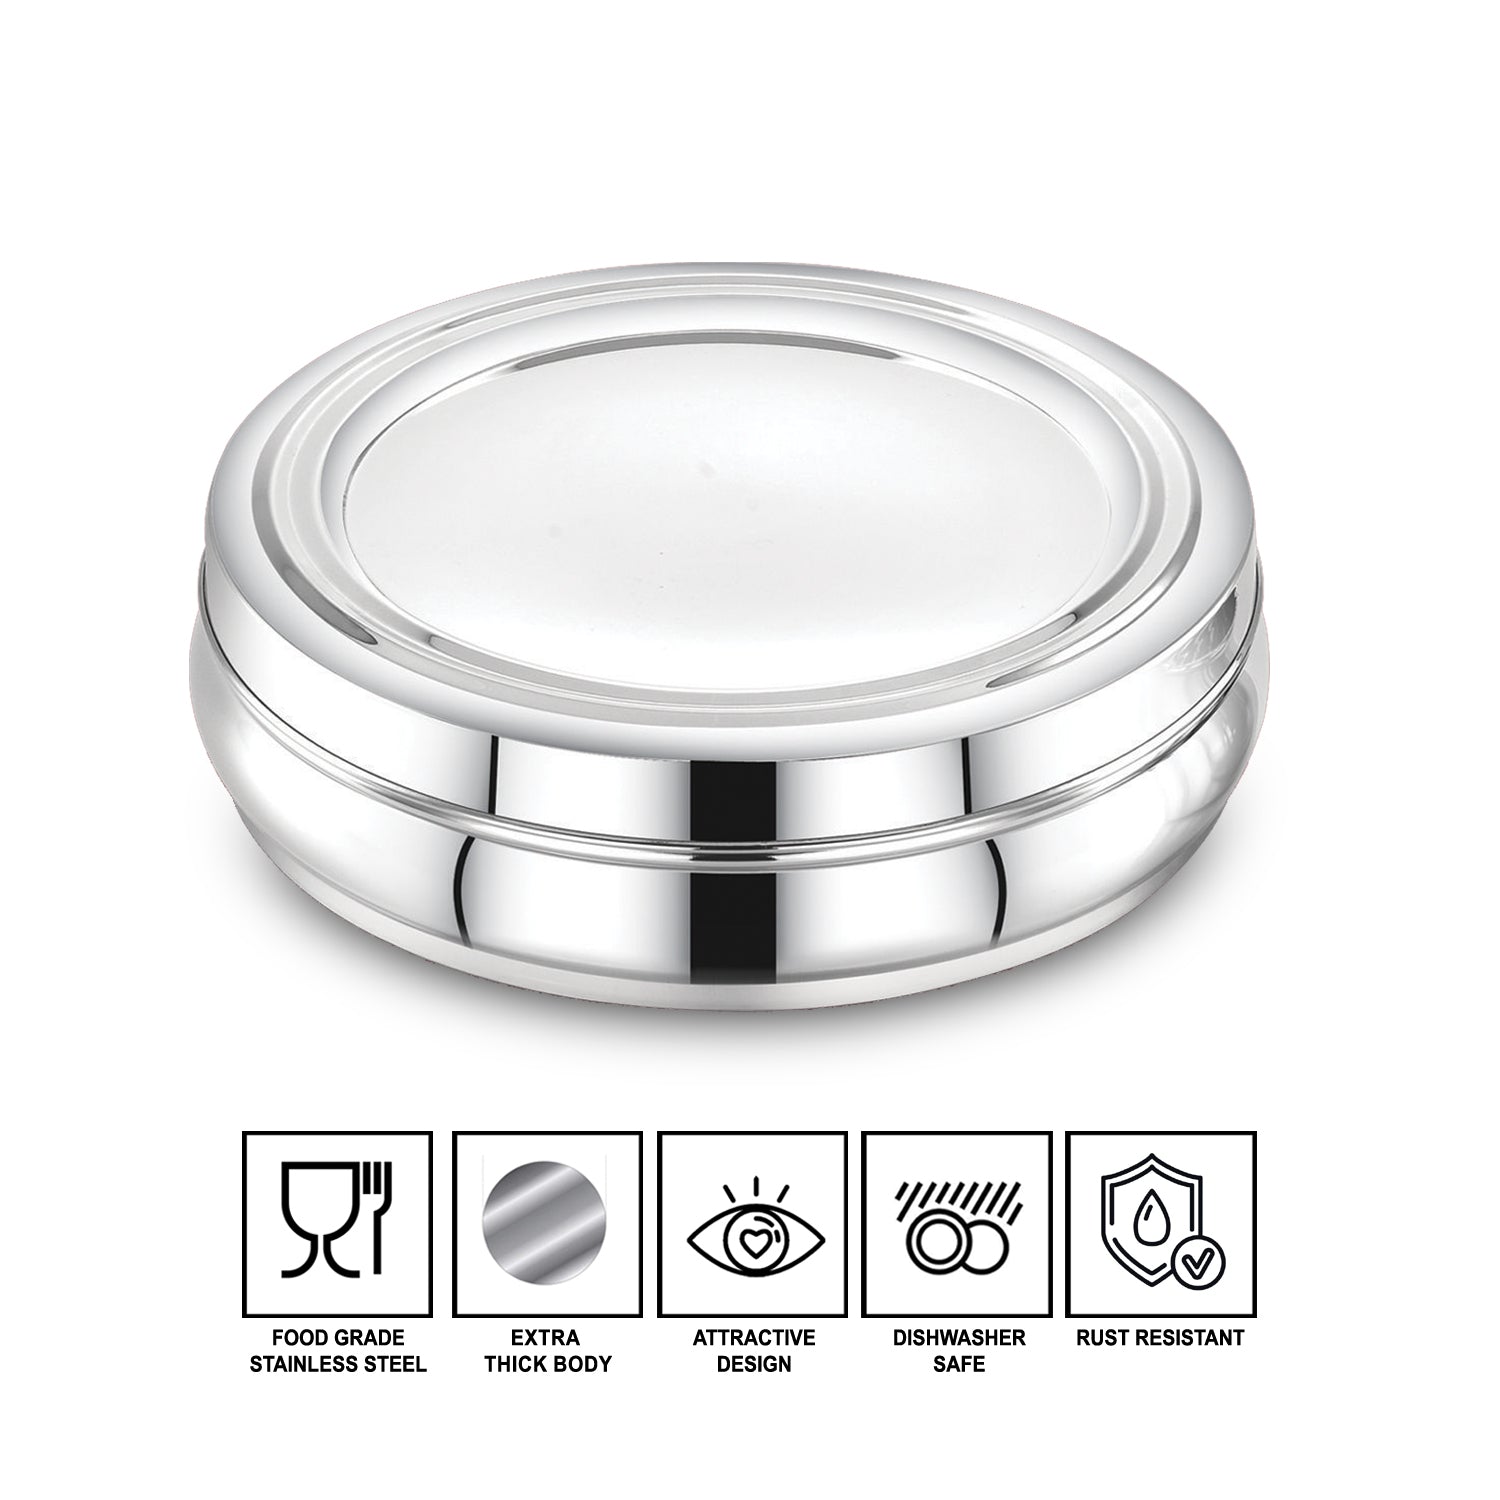 AVIAS stainless steel Deluxe spice box features